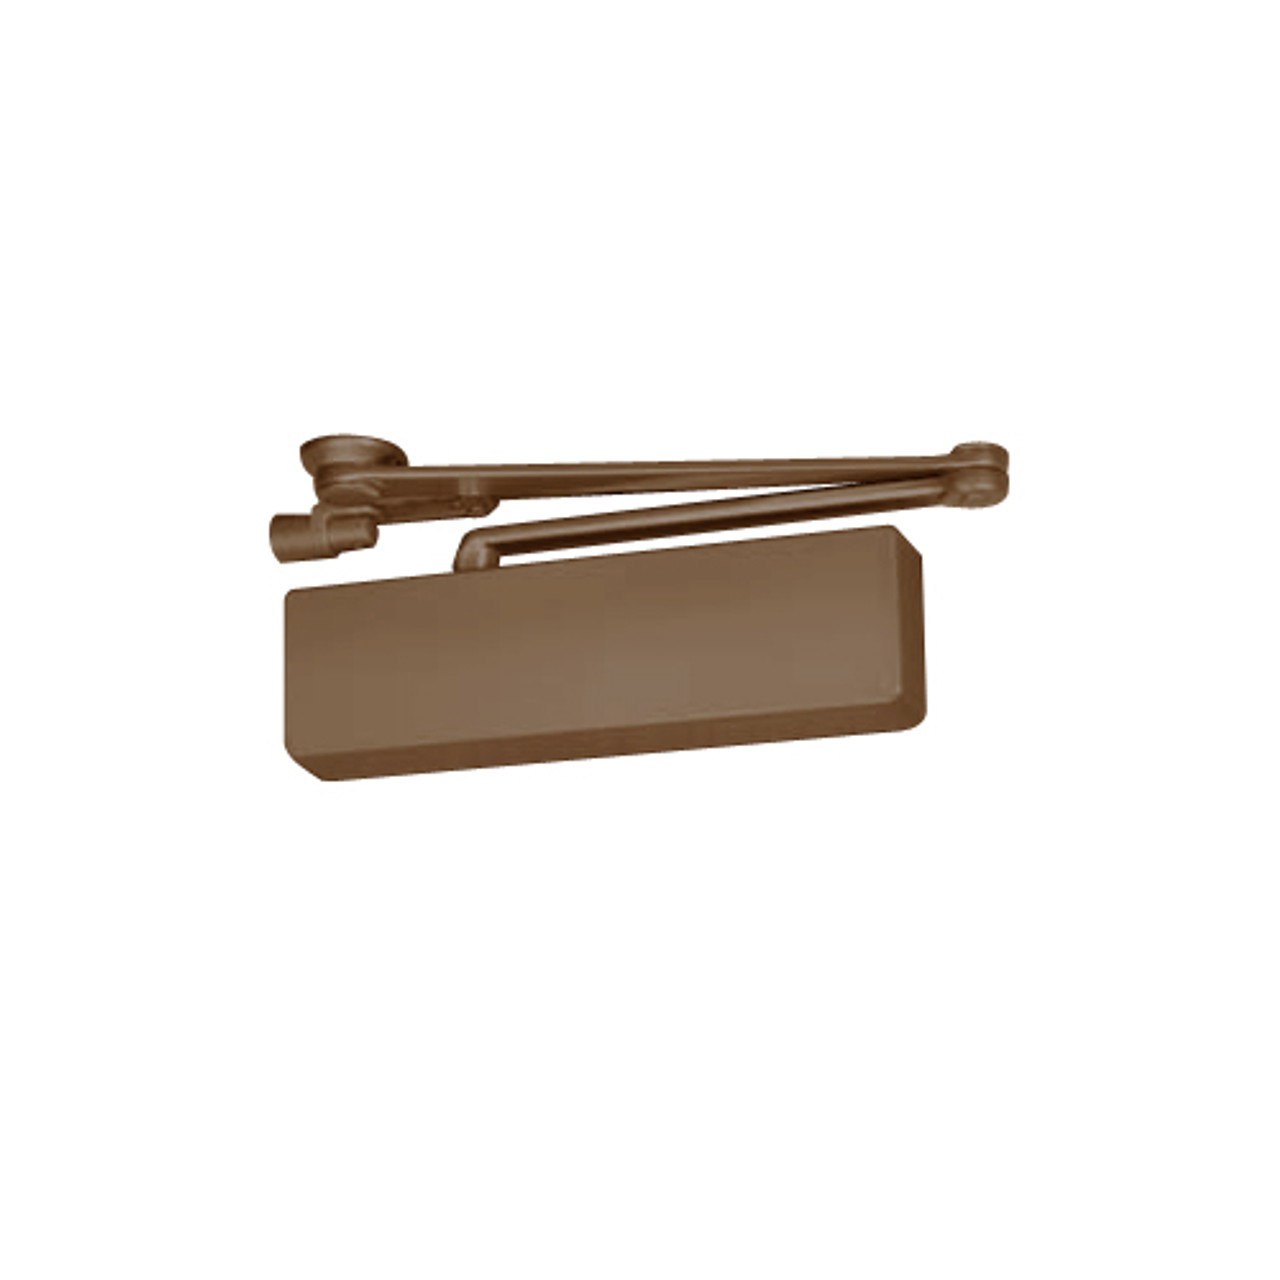 CPS7500TDA-691 Norton 7500 Series Hold Open Institutional Door Closer with CloserPlus Spring Arm in Dull Bronze Finish